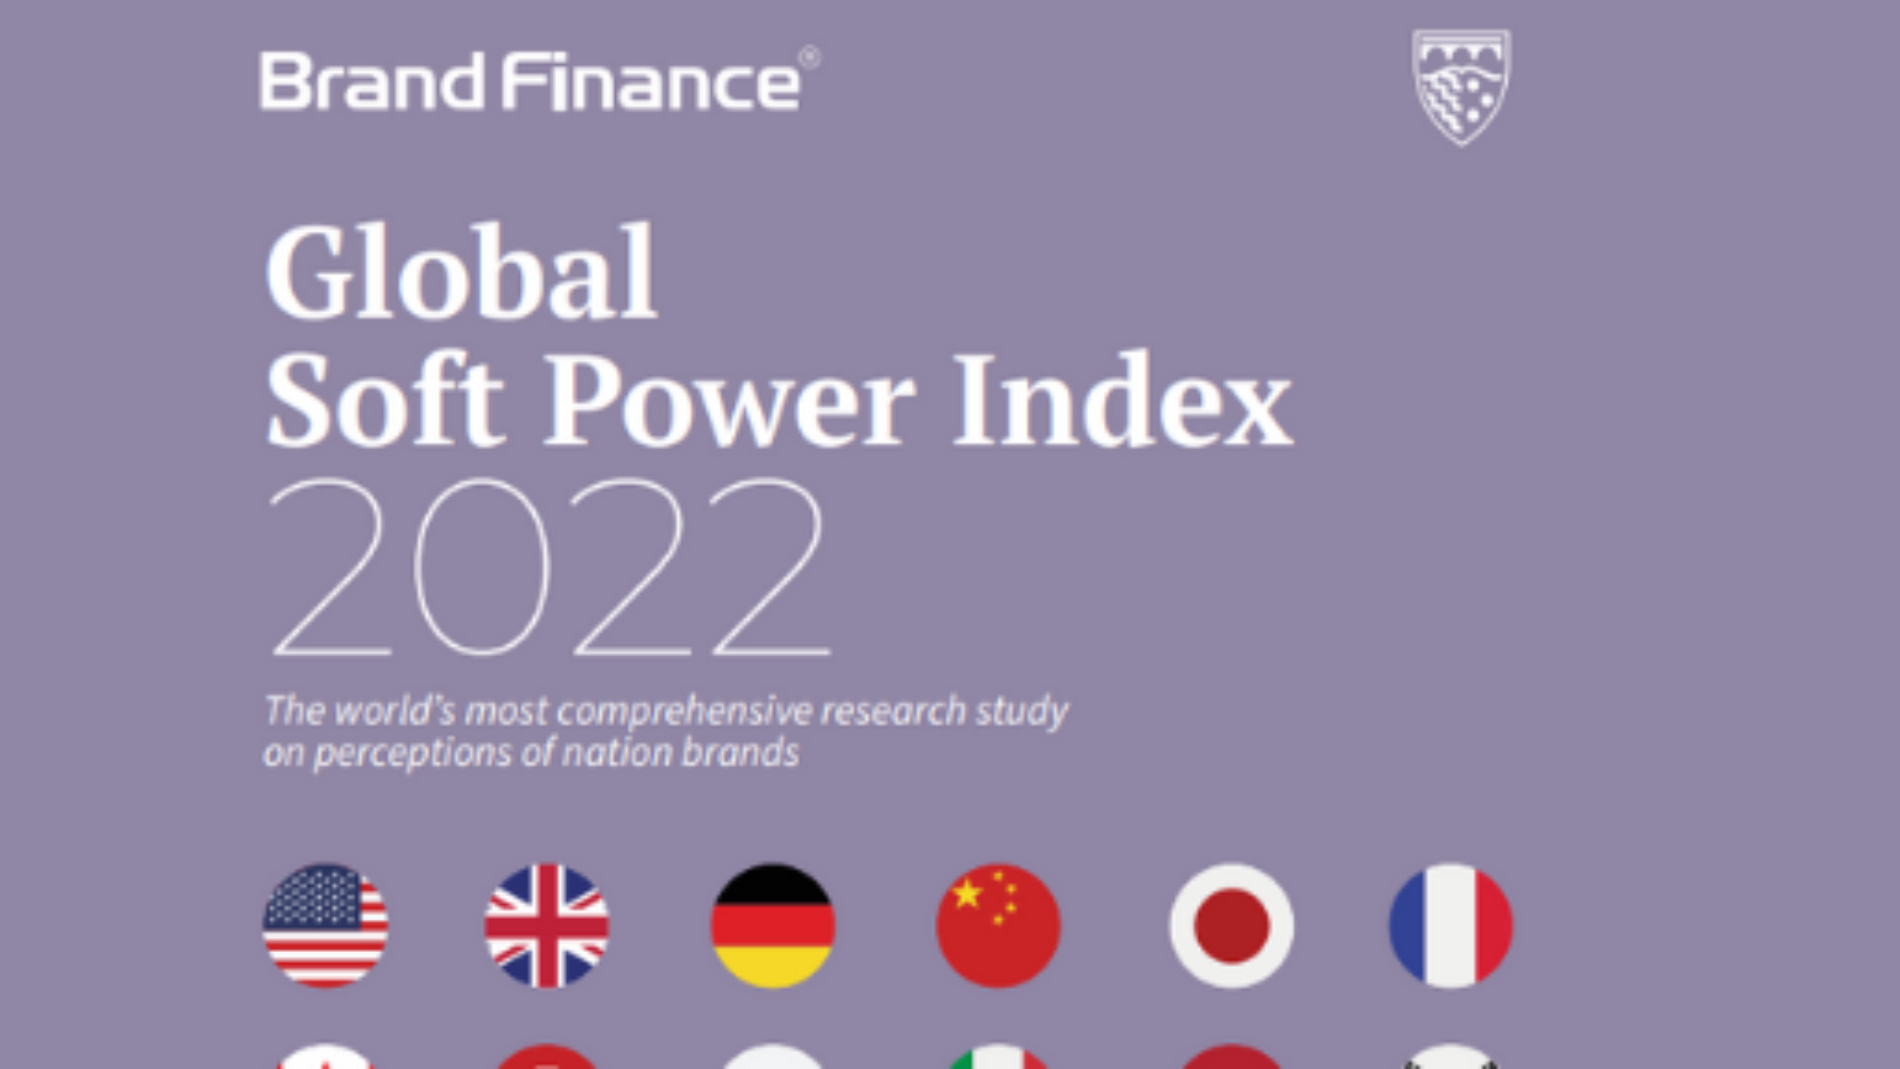 Global Soft Power Index 2022: Italy up in 10th position